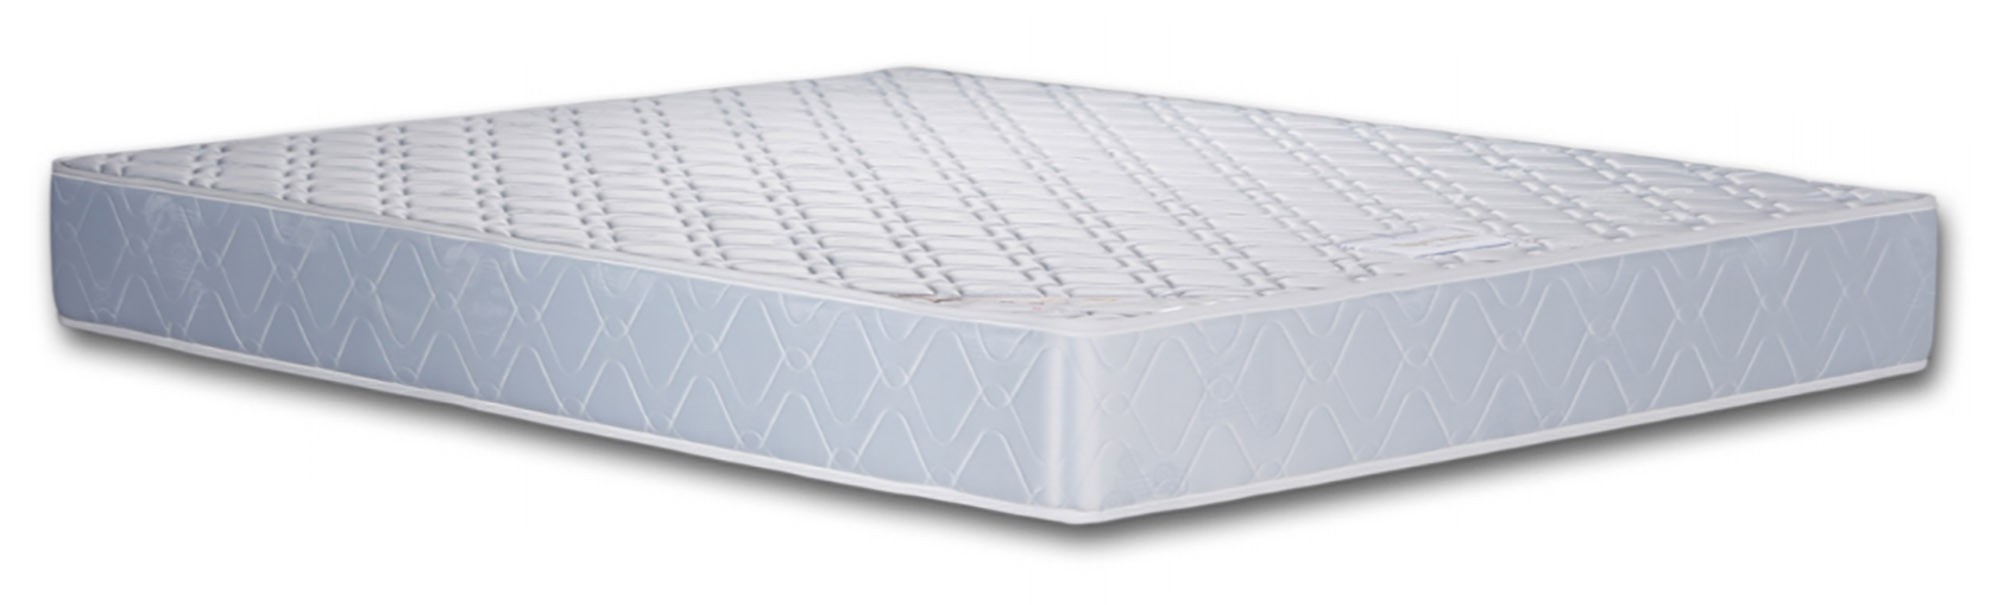 THE MATTRESS SUSTAINING THE BODY AT ESSENTIAL STRESS FACTORS